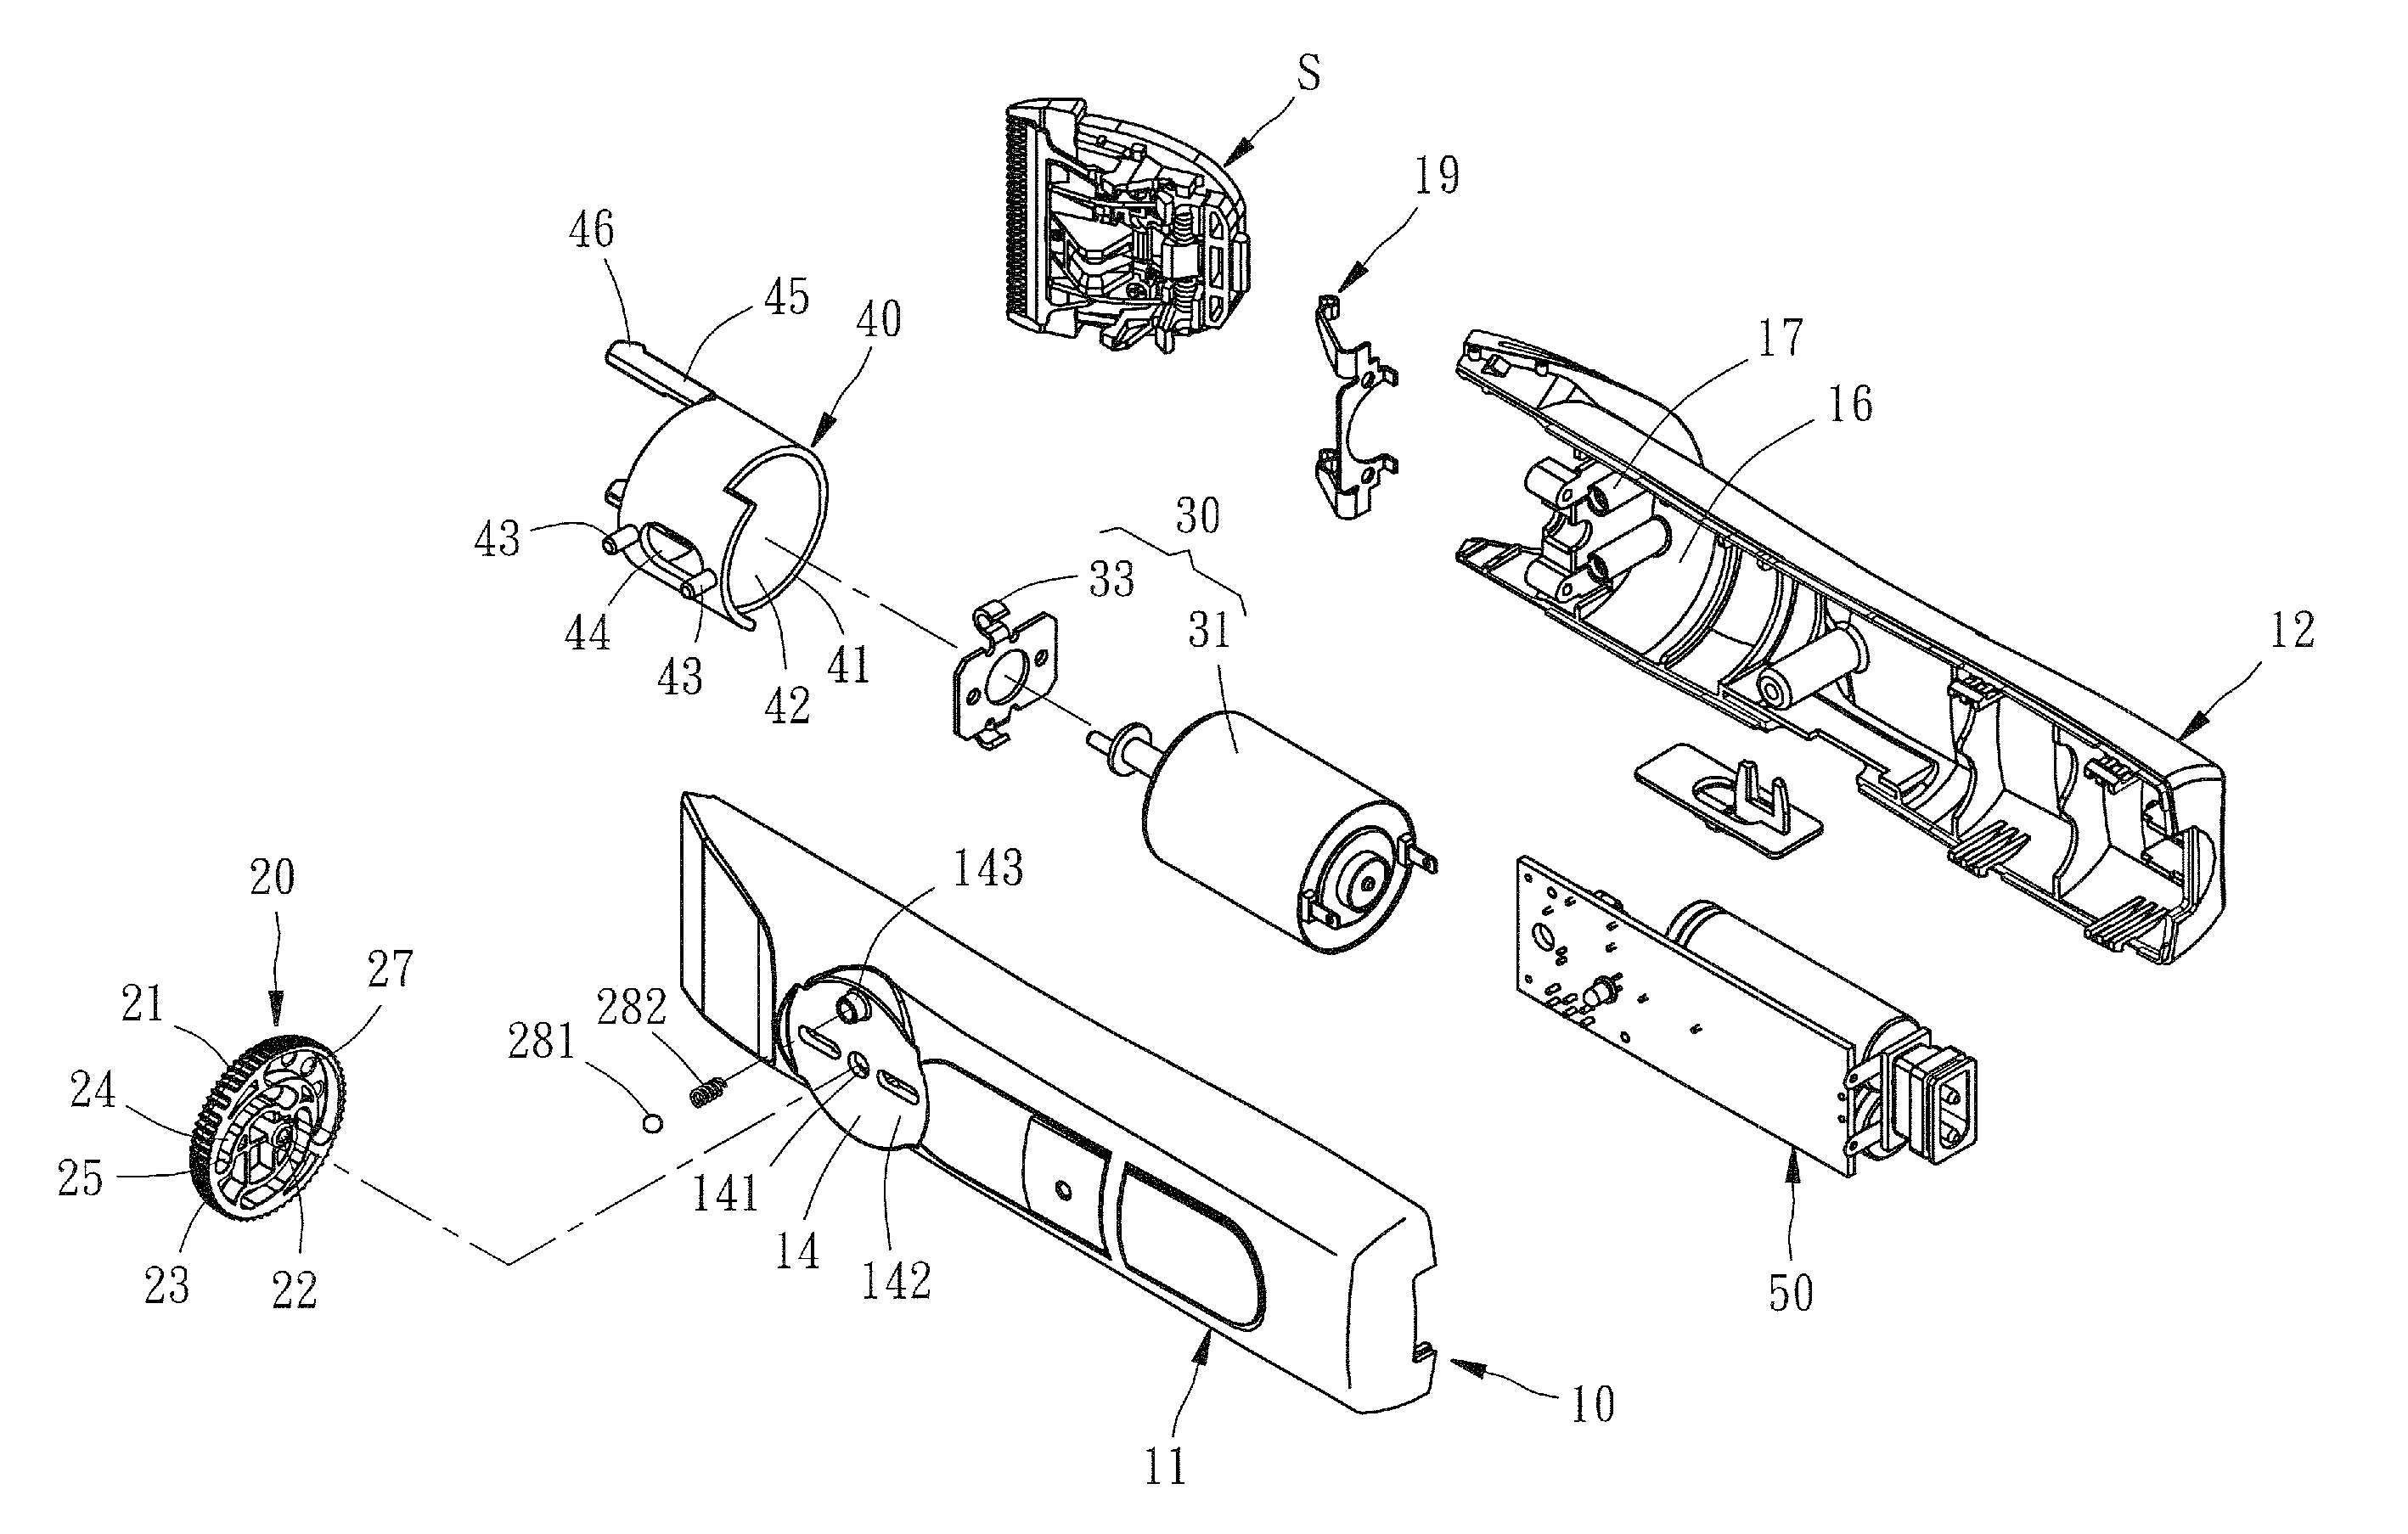 Hair clipper with improved blade control structures